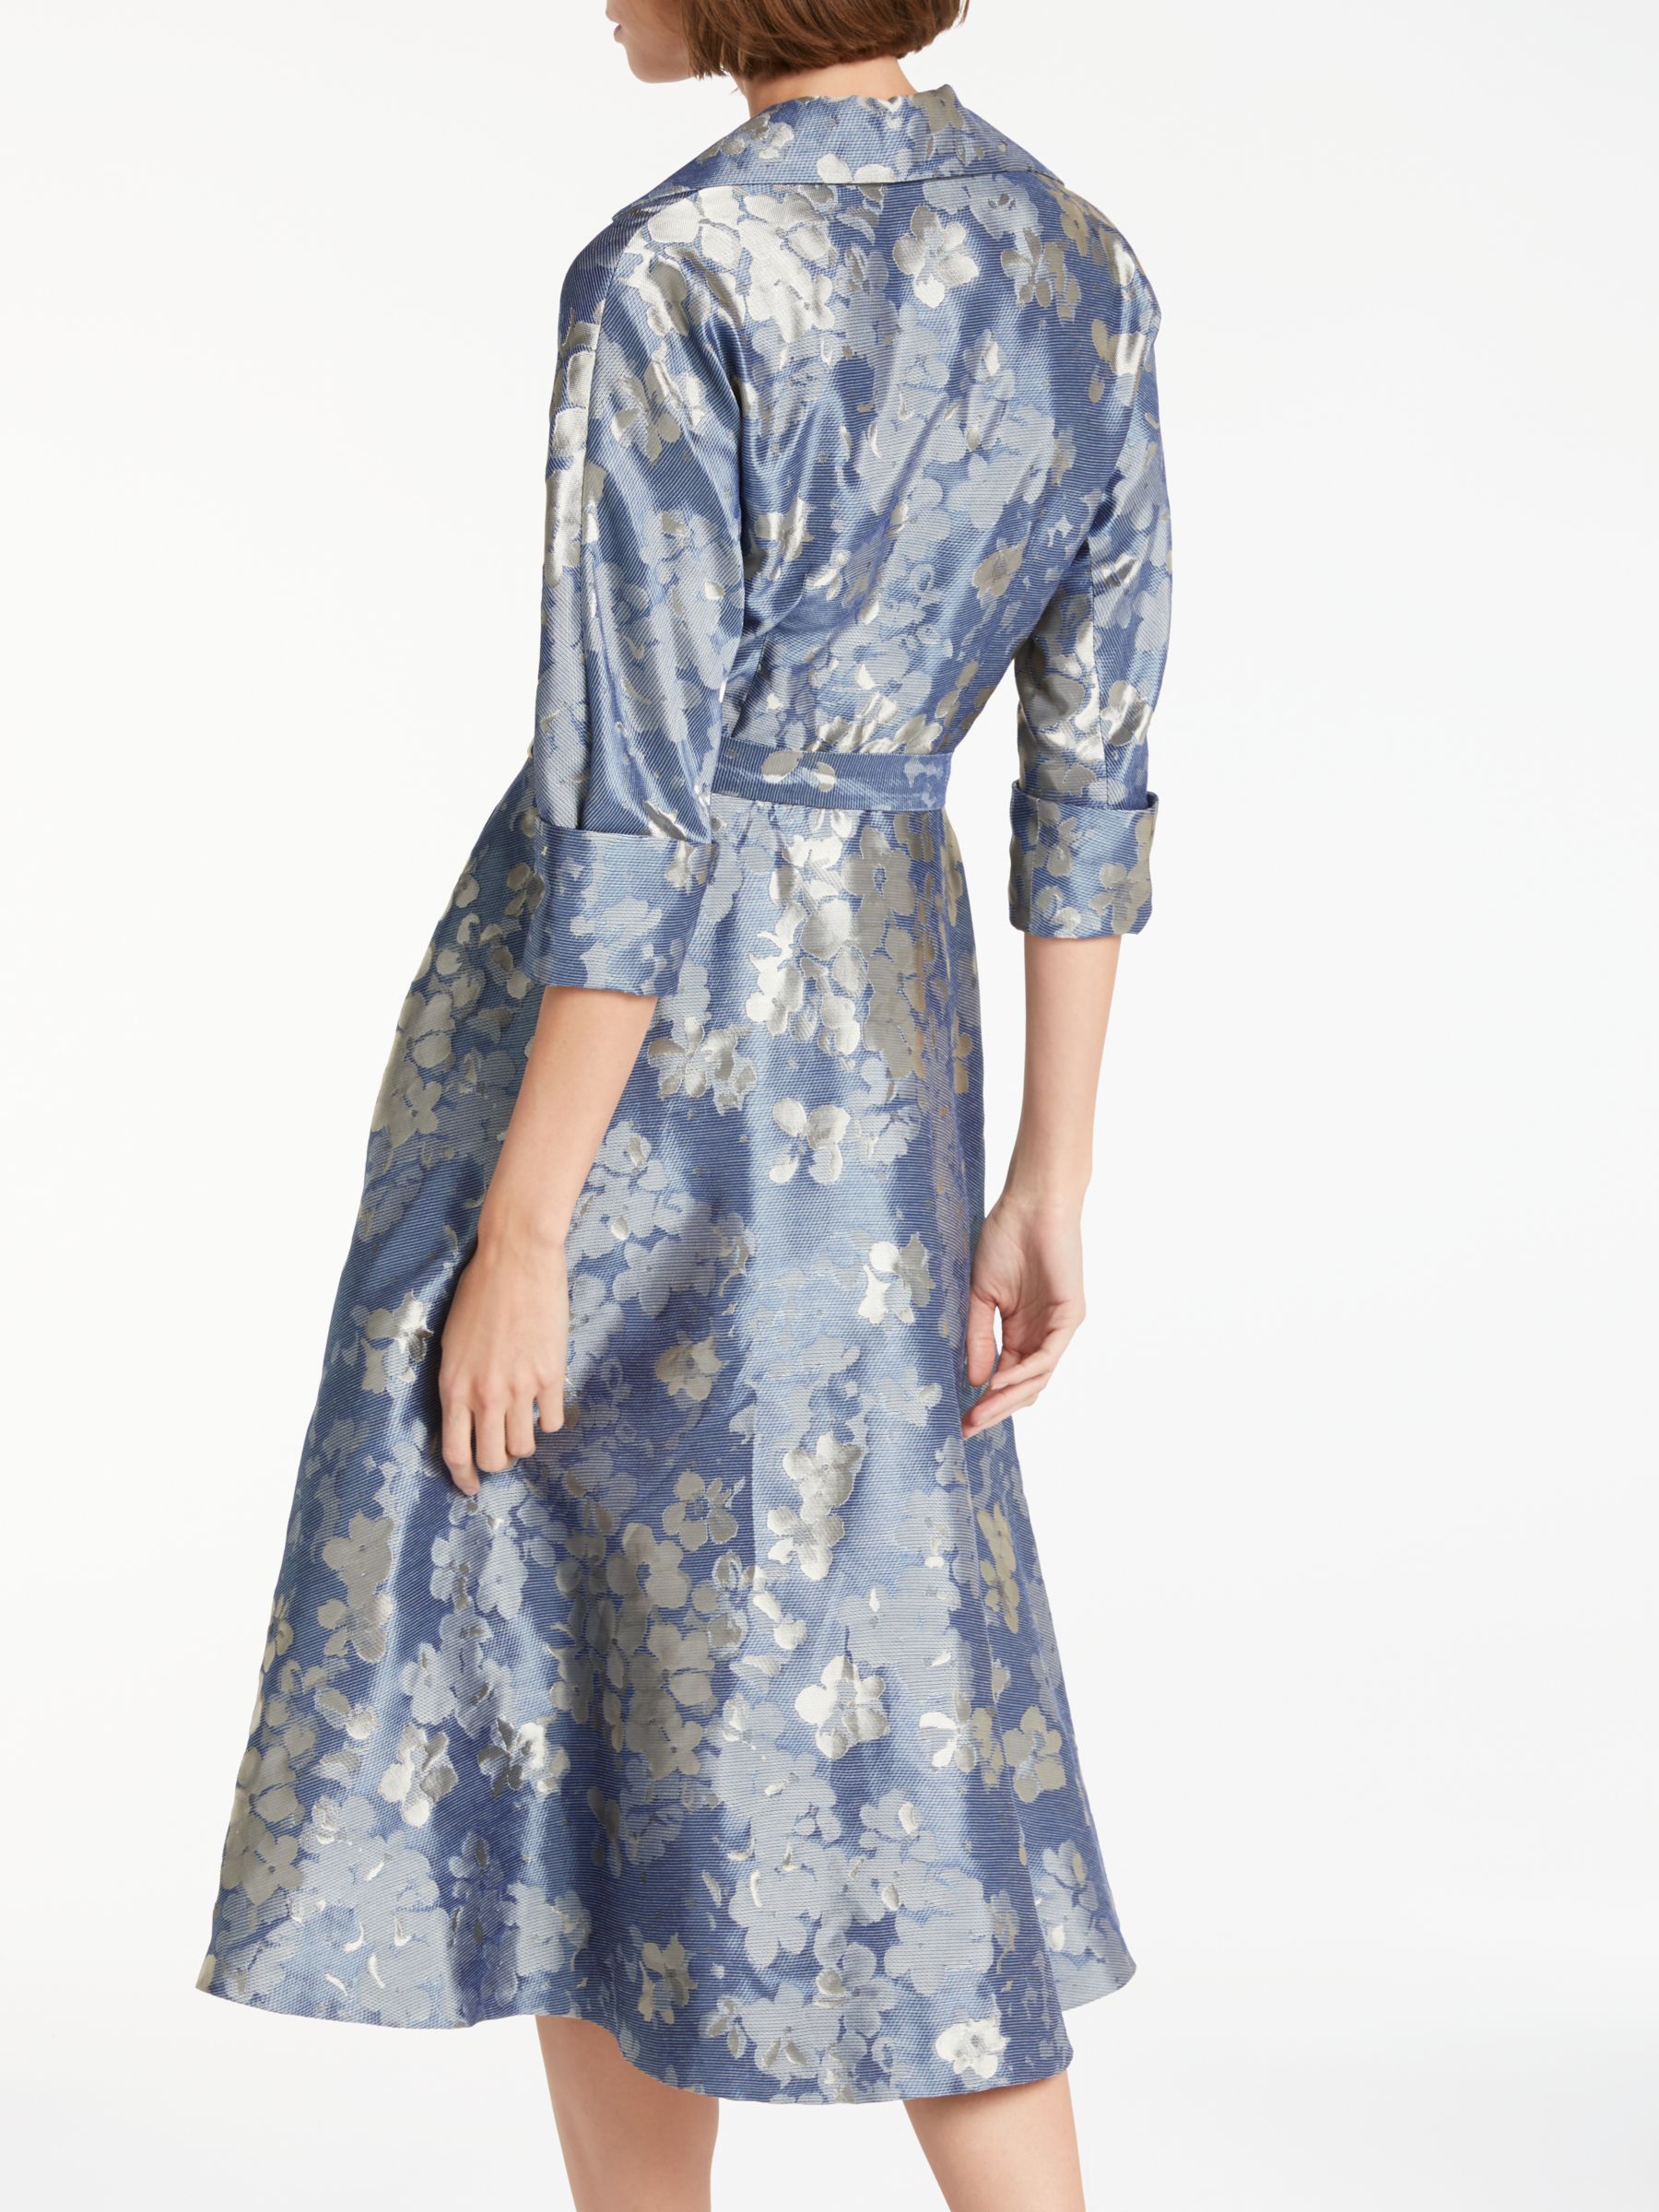 Bruce by Bruce Oldfield Floral Jacquard Dress, Blue, 10